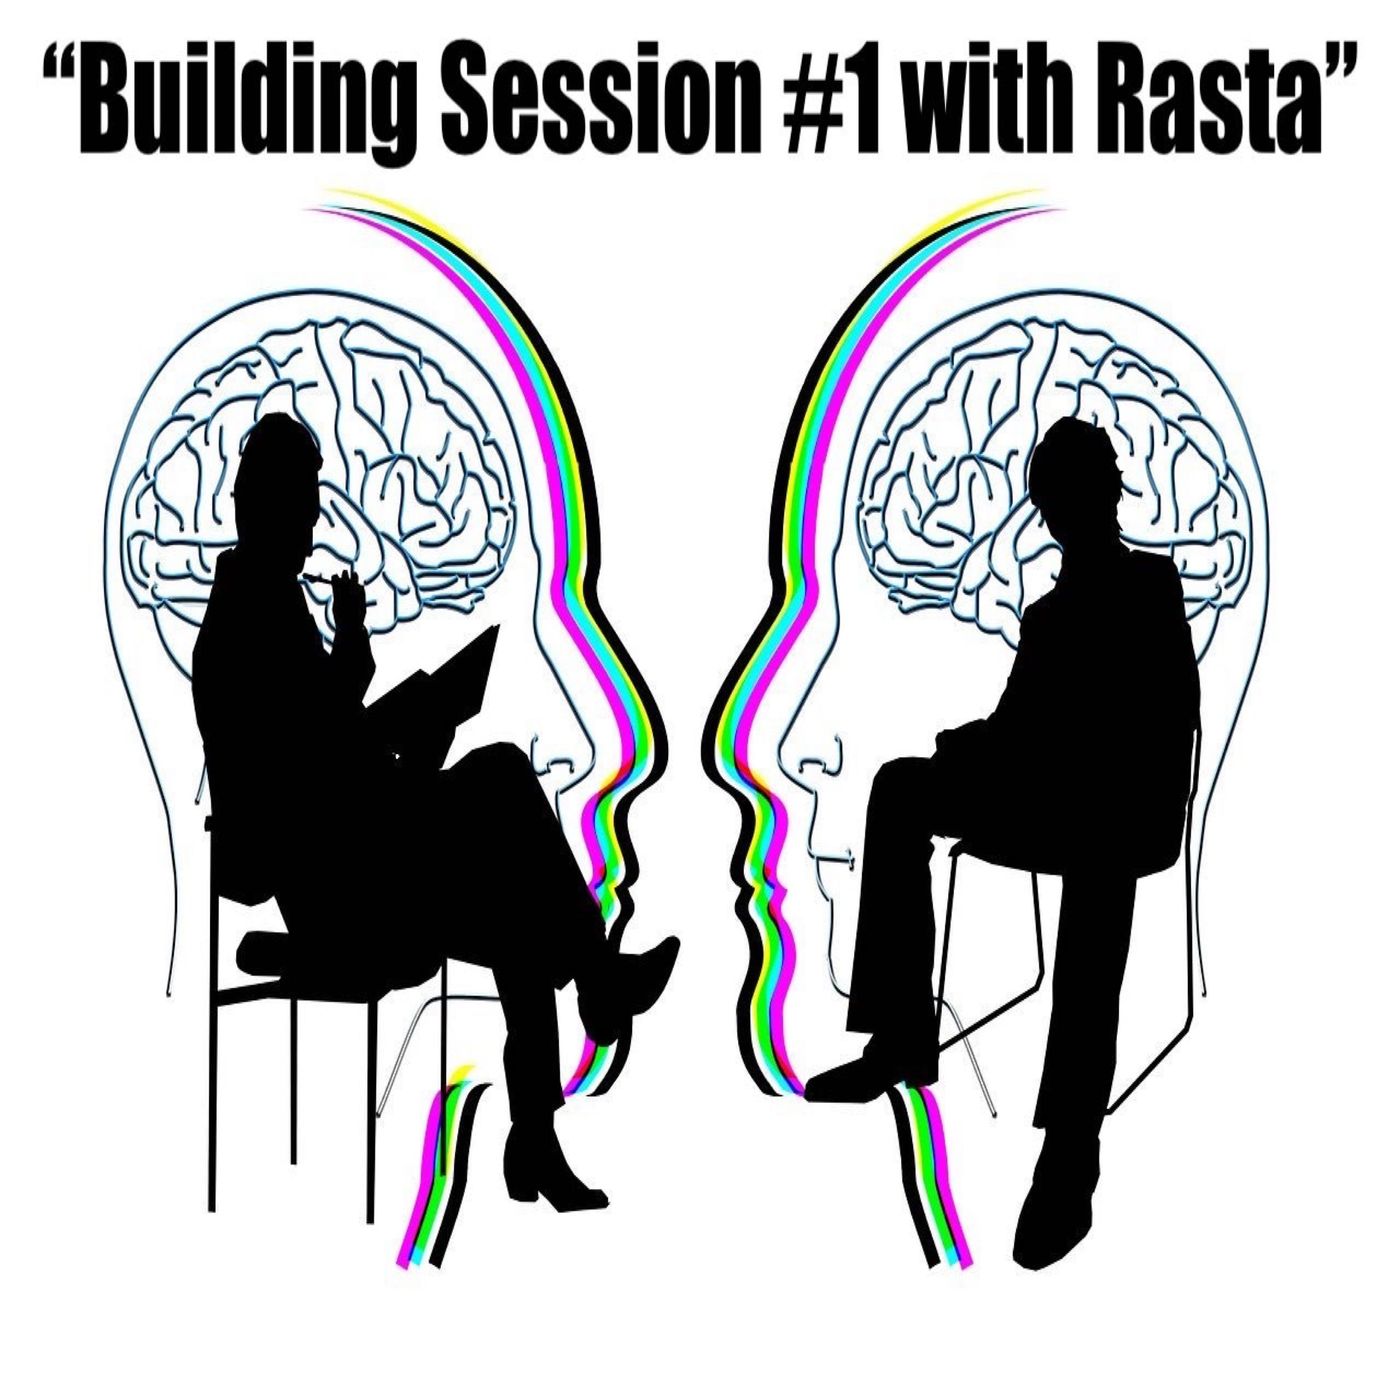 Ep 62 "Building Session # 1 with Rasta"